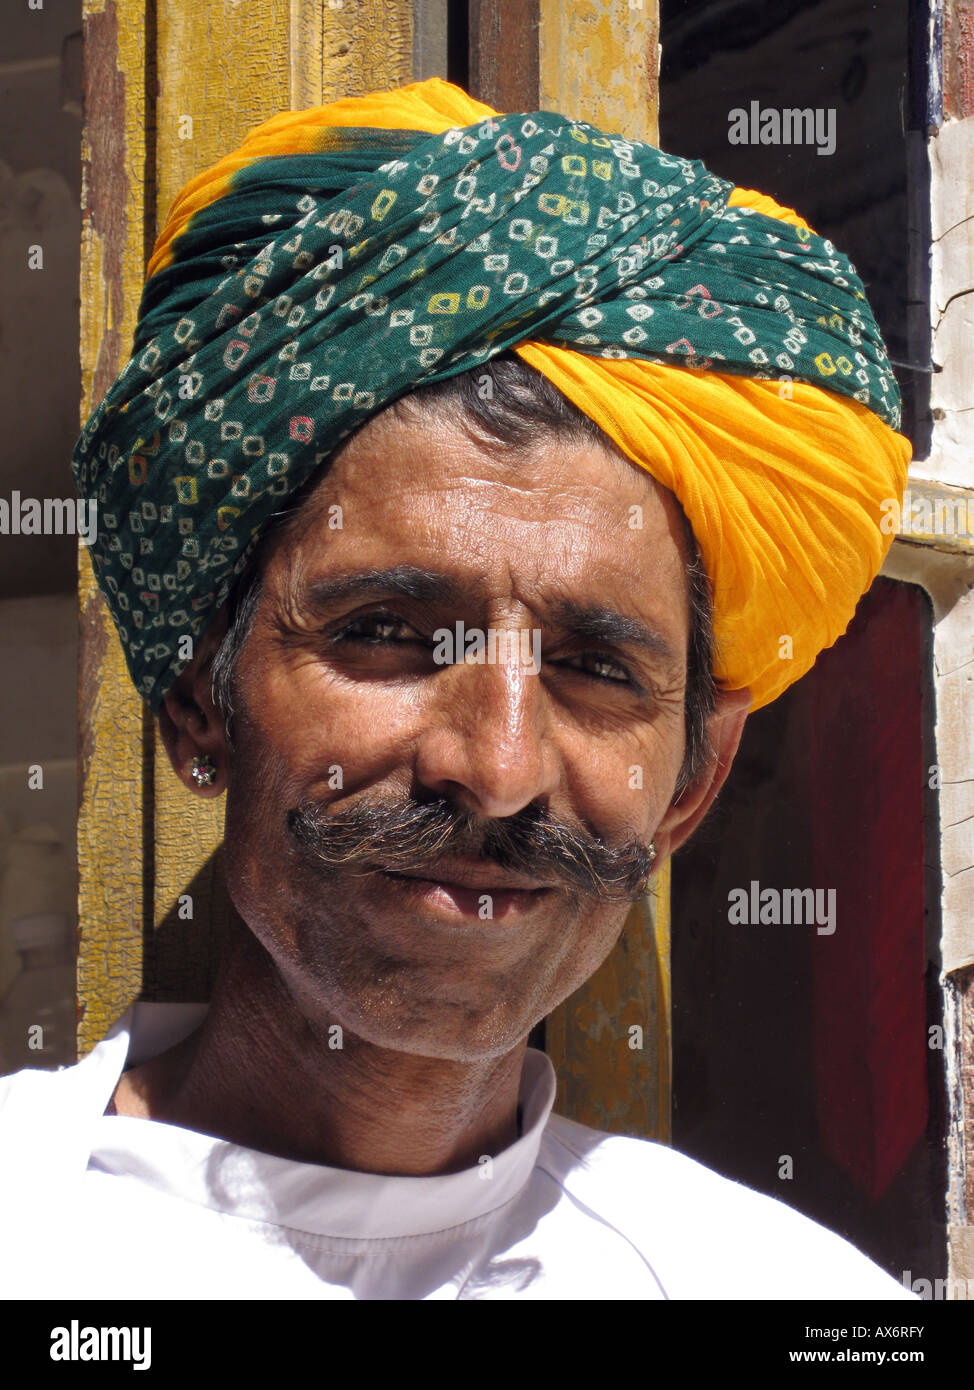 Man with orange and green turban face portrait moustache Stock Photo